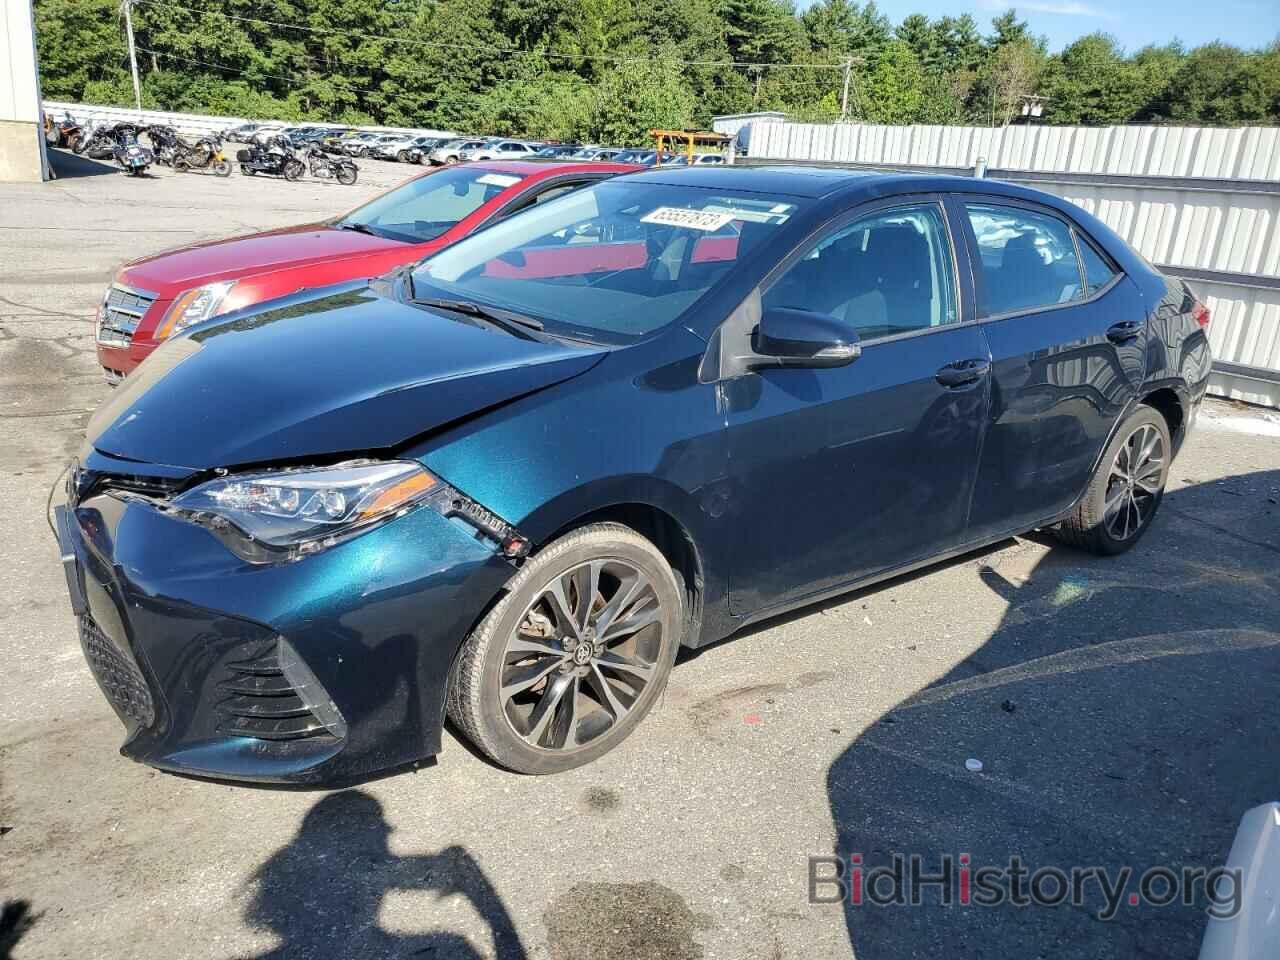 Report 2T1BURHE6HC895593 TOYOTA COROLLA 2017 BLUE GAS - price and ...